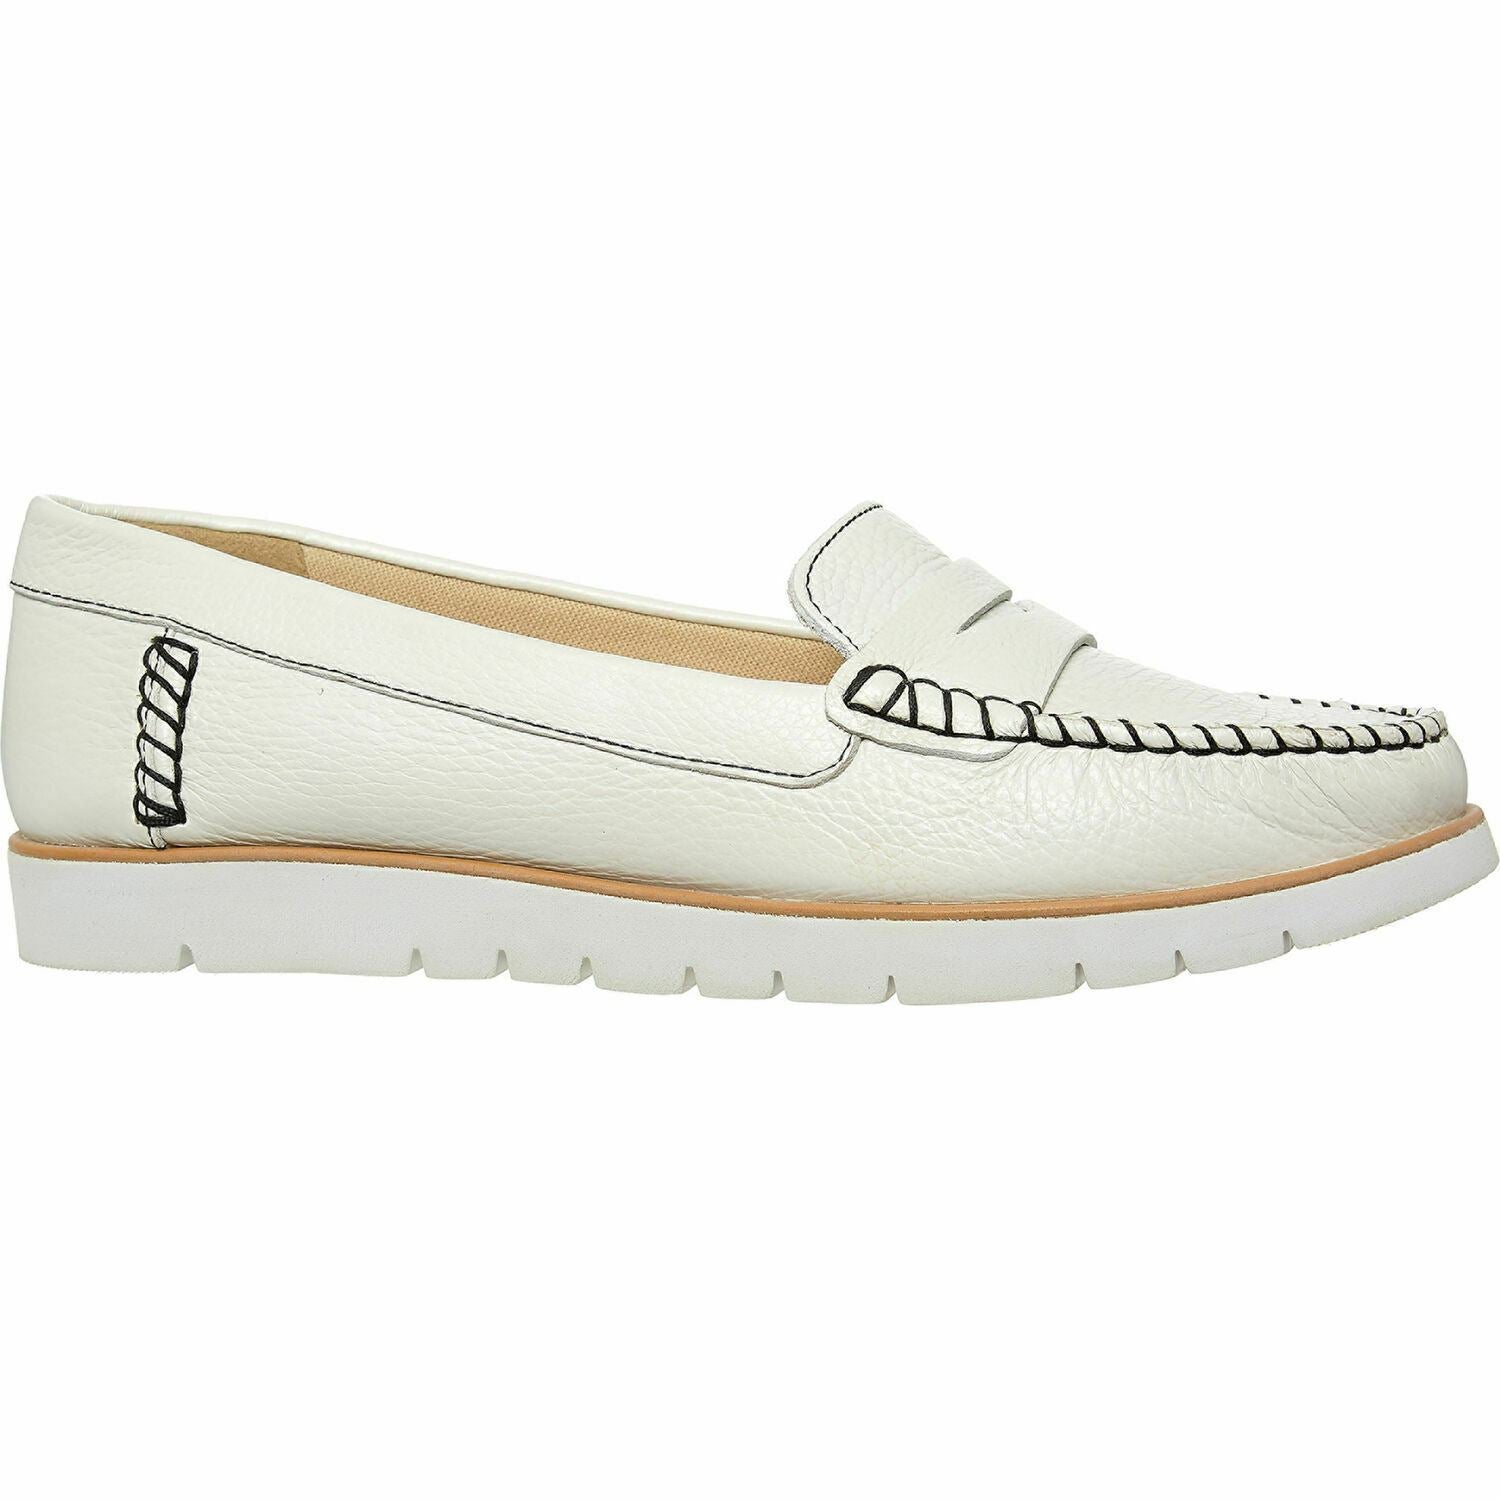 GEOX RESPIRA Women's KOOKEAN Genuine Leather Loafers Shoes Pearl White size UK 7